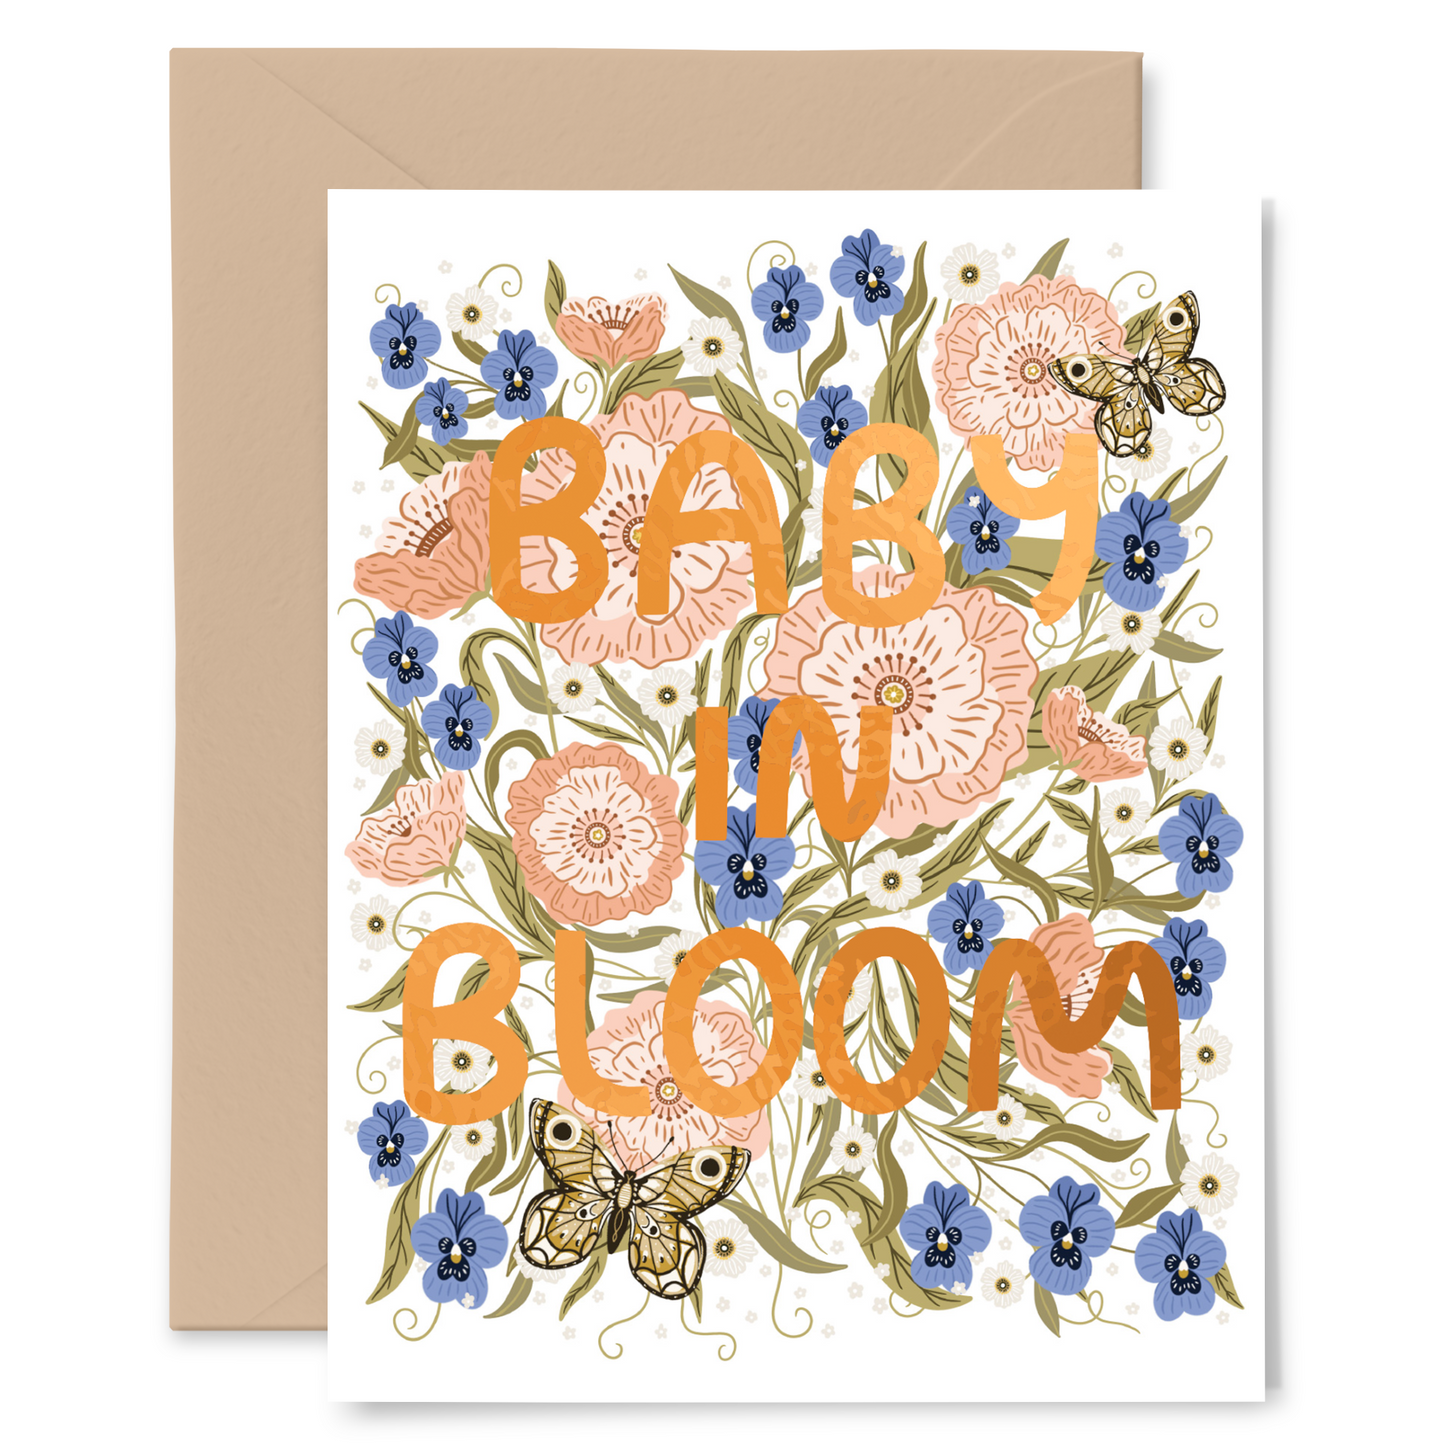 Baby in Bloom Card